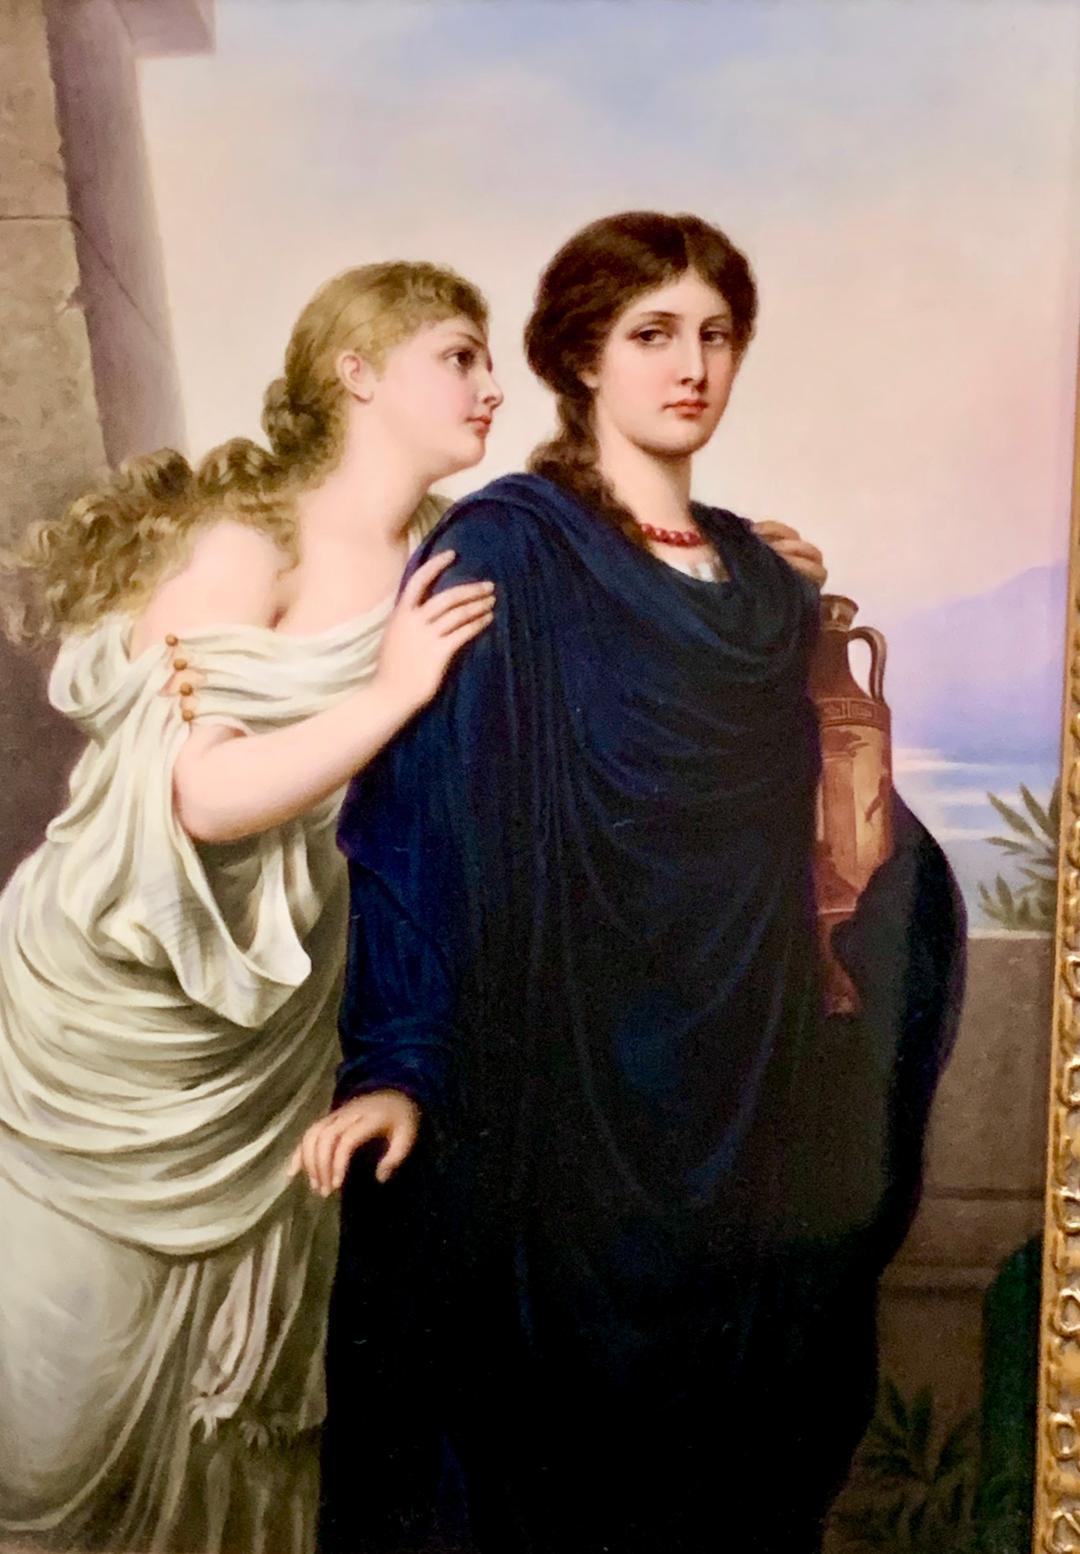 A fine 19th century German KPM porcelain painted plaque, depicting Antigone and Ismene, sisters in an ancient Greek play by Sophocles. After a painting by Emil Teschendorf. (German, 1833-1894)

Stamped with KPM Sceptre mark and numbered 
Circa